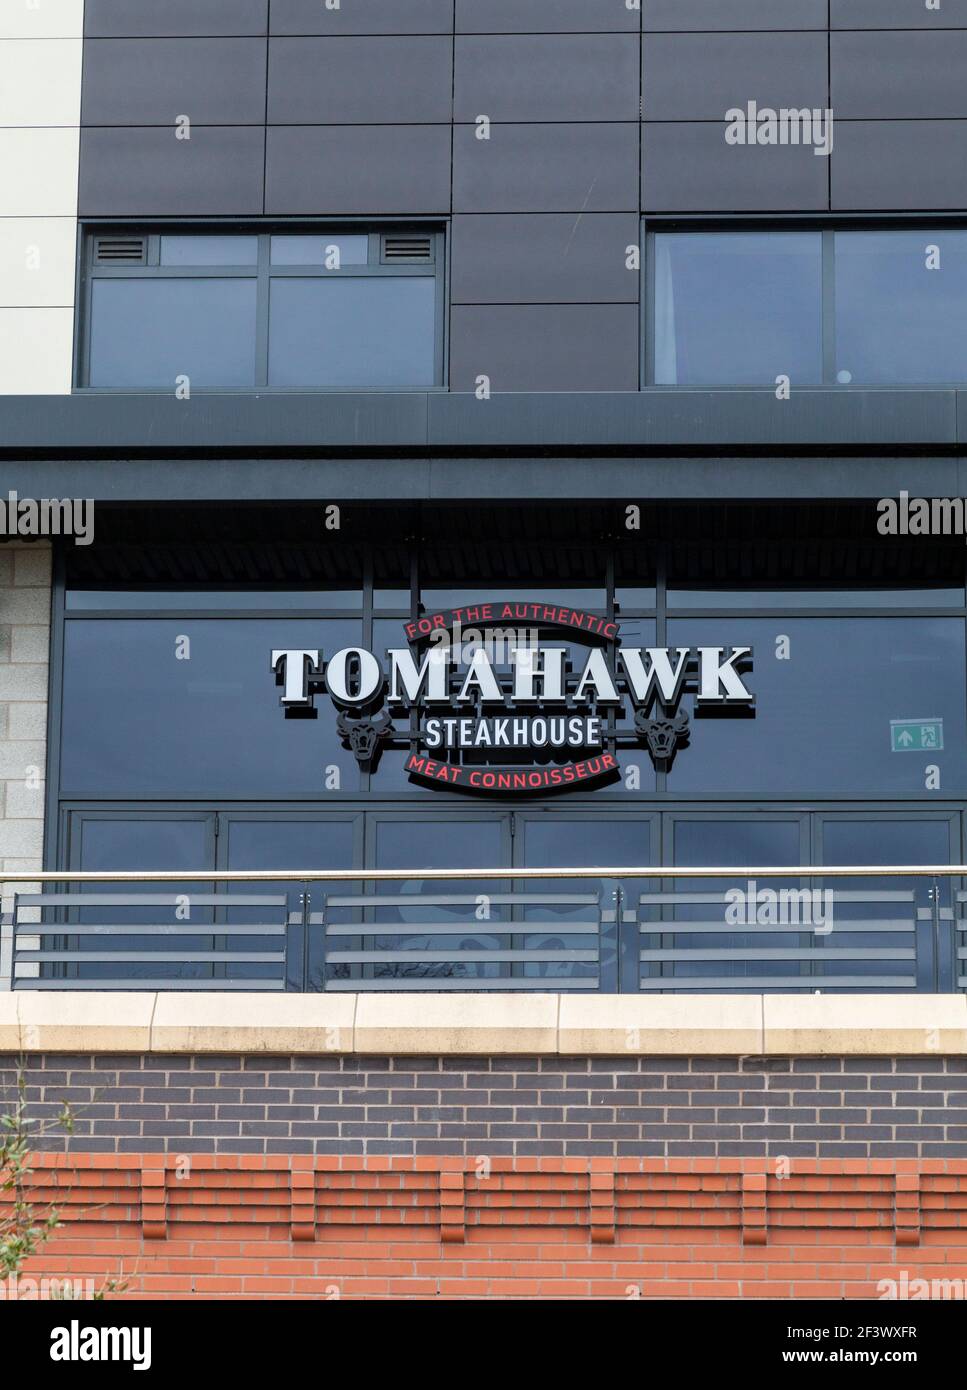 Darlington,UK. 17th March 2021.The Tomahawk Steakhouse restaurant chain which asked furloughed staff to loan it 10% of their wages, amid claims of potential sackings, has paid the money back.David Dixon/ Alamy Stock Photo